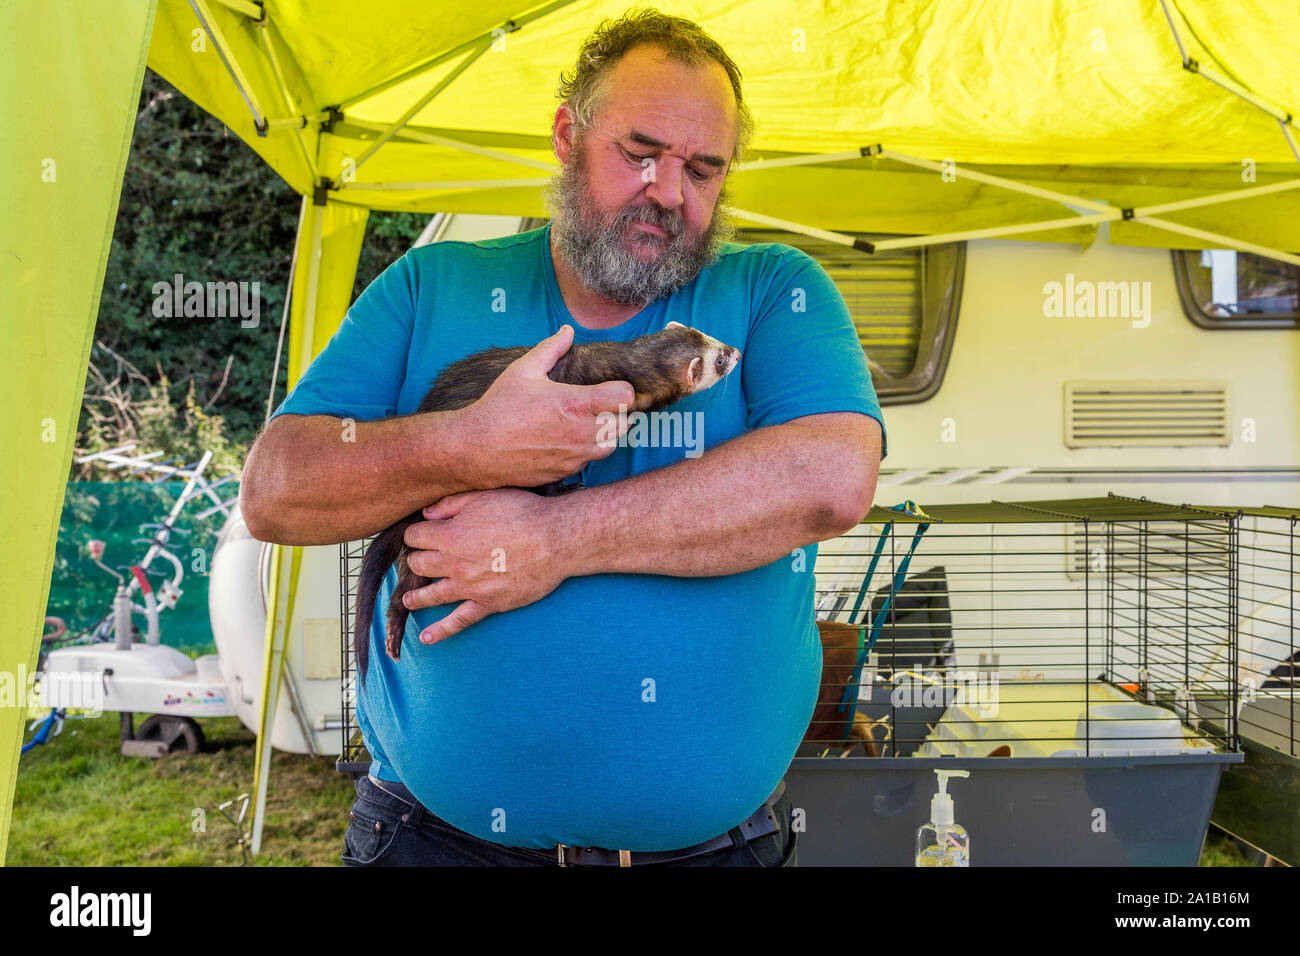 A bearded man affectionately holding his pet ferret. Stock Photo